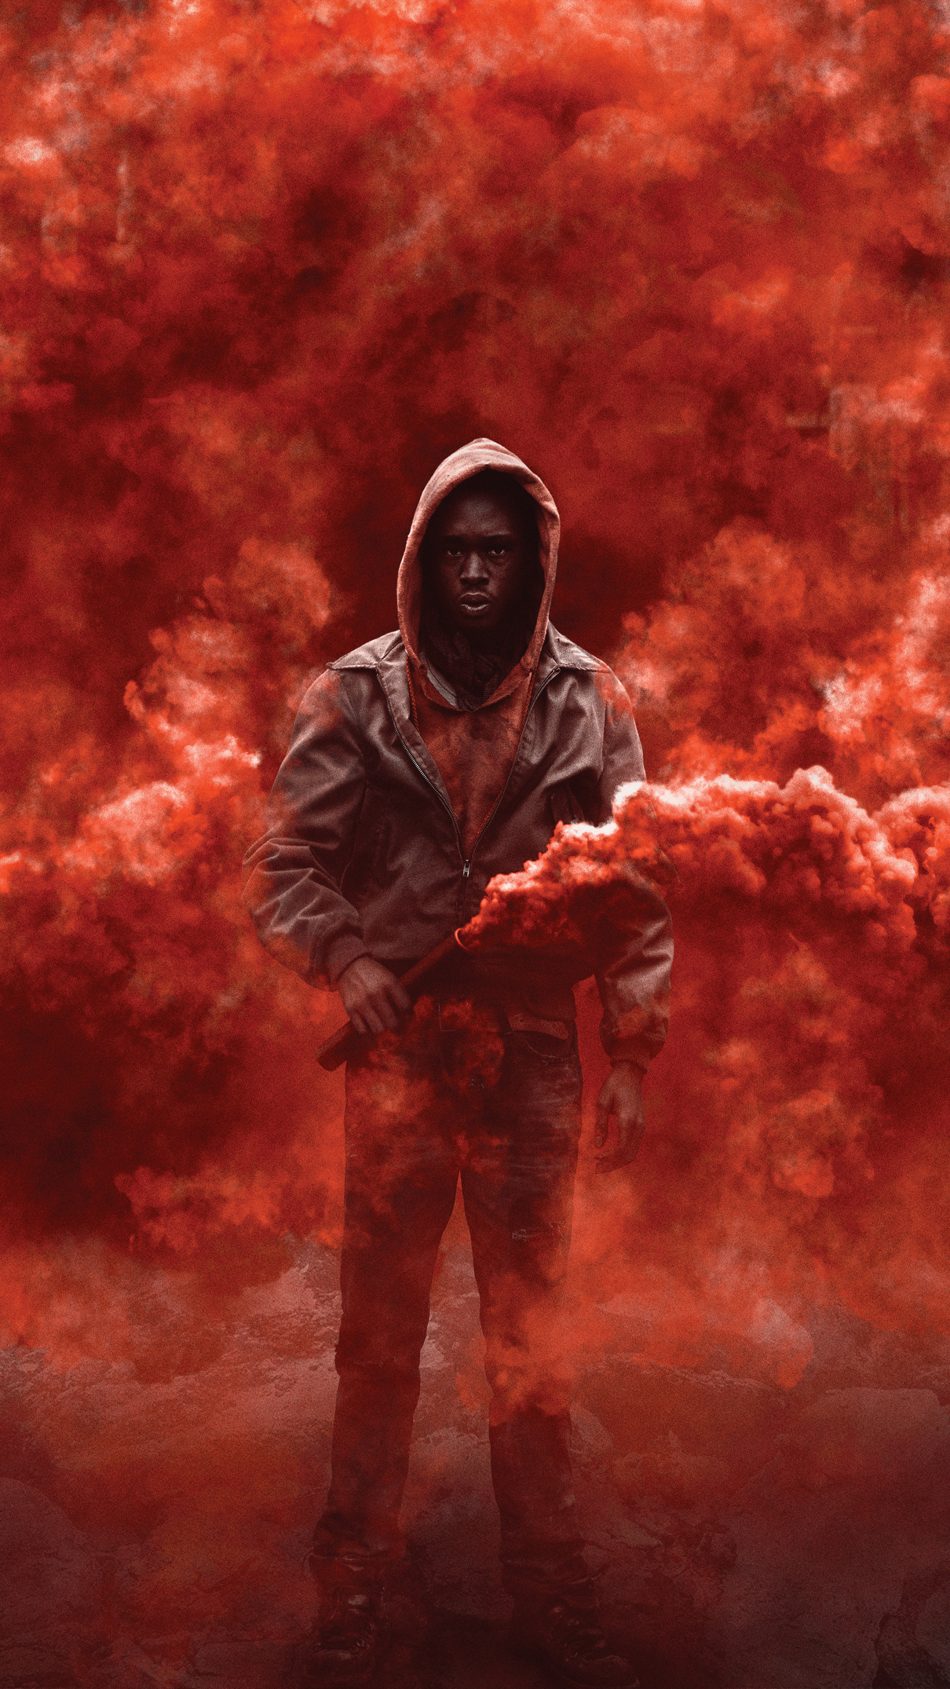 Best Quality Captive State 4k UHD Mobile Wallpaper